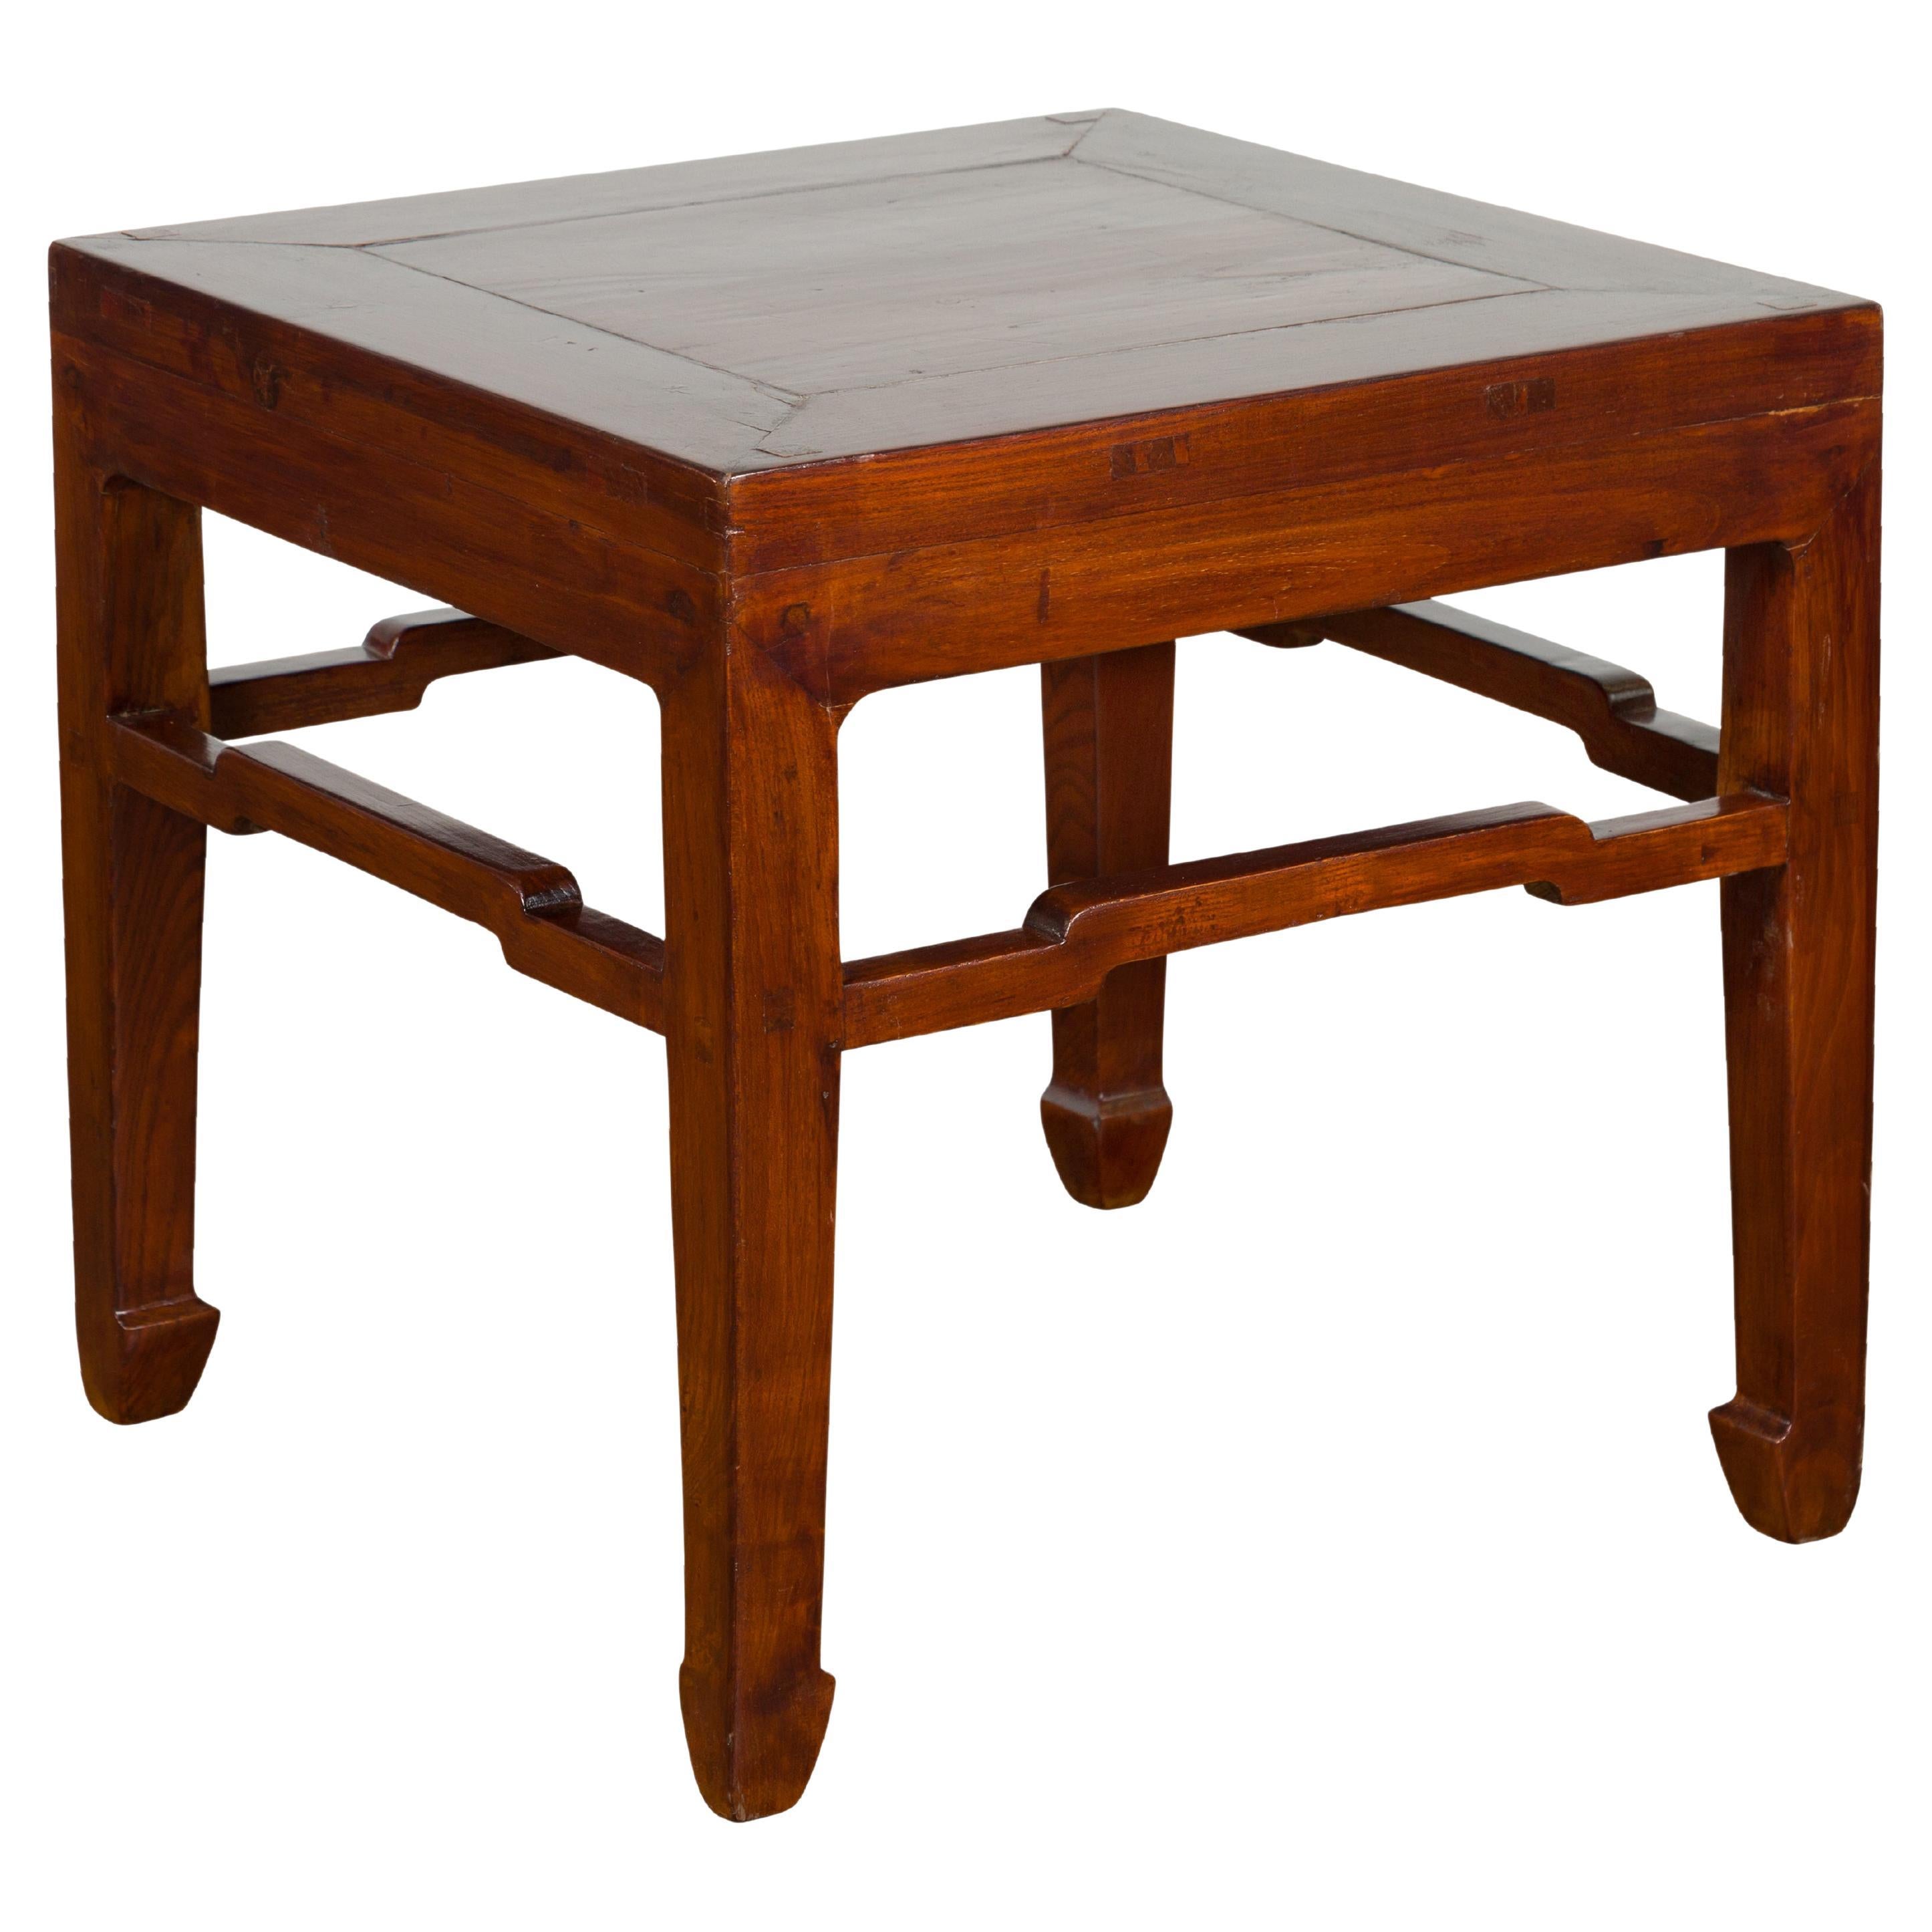 Chinese Qing Dynasty Period 19th Century Side Table with Humpback Stretchers For Sale